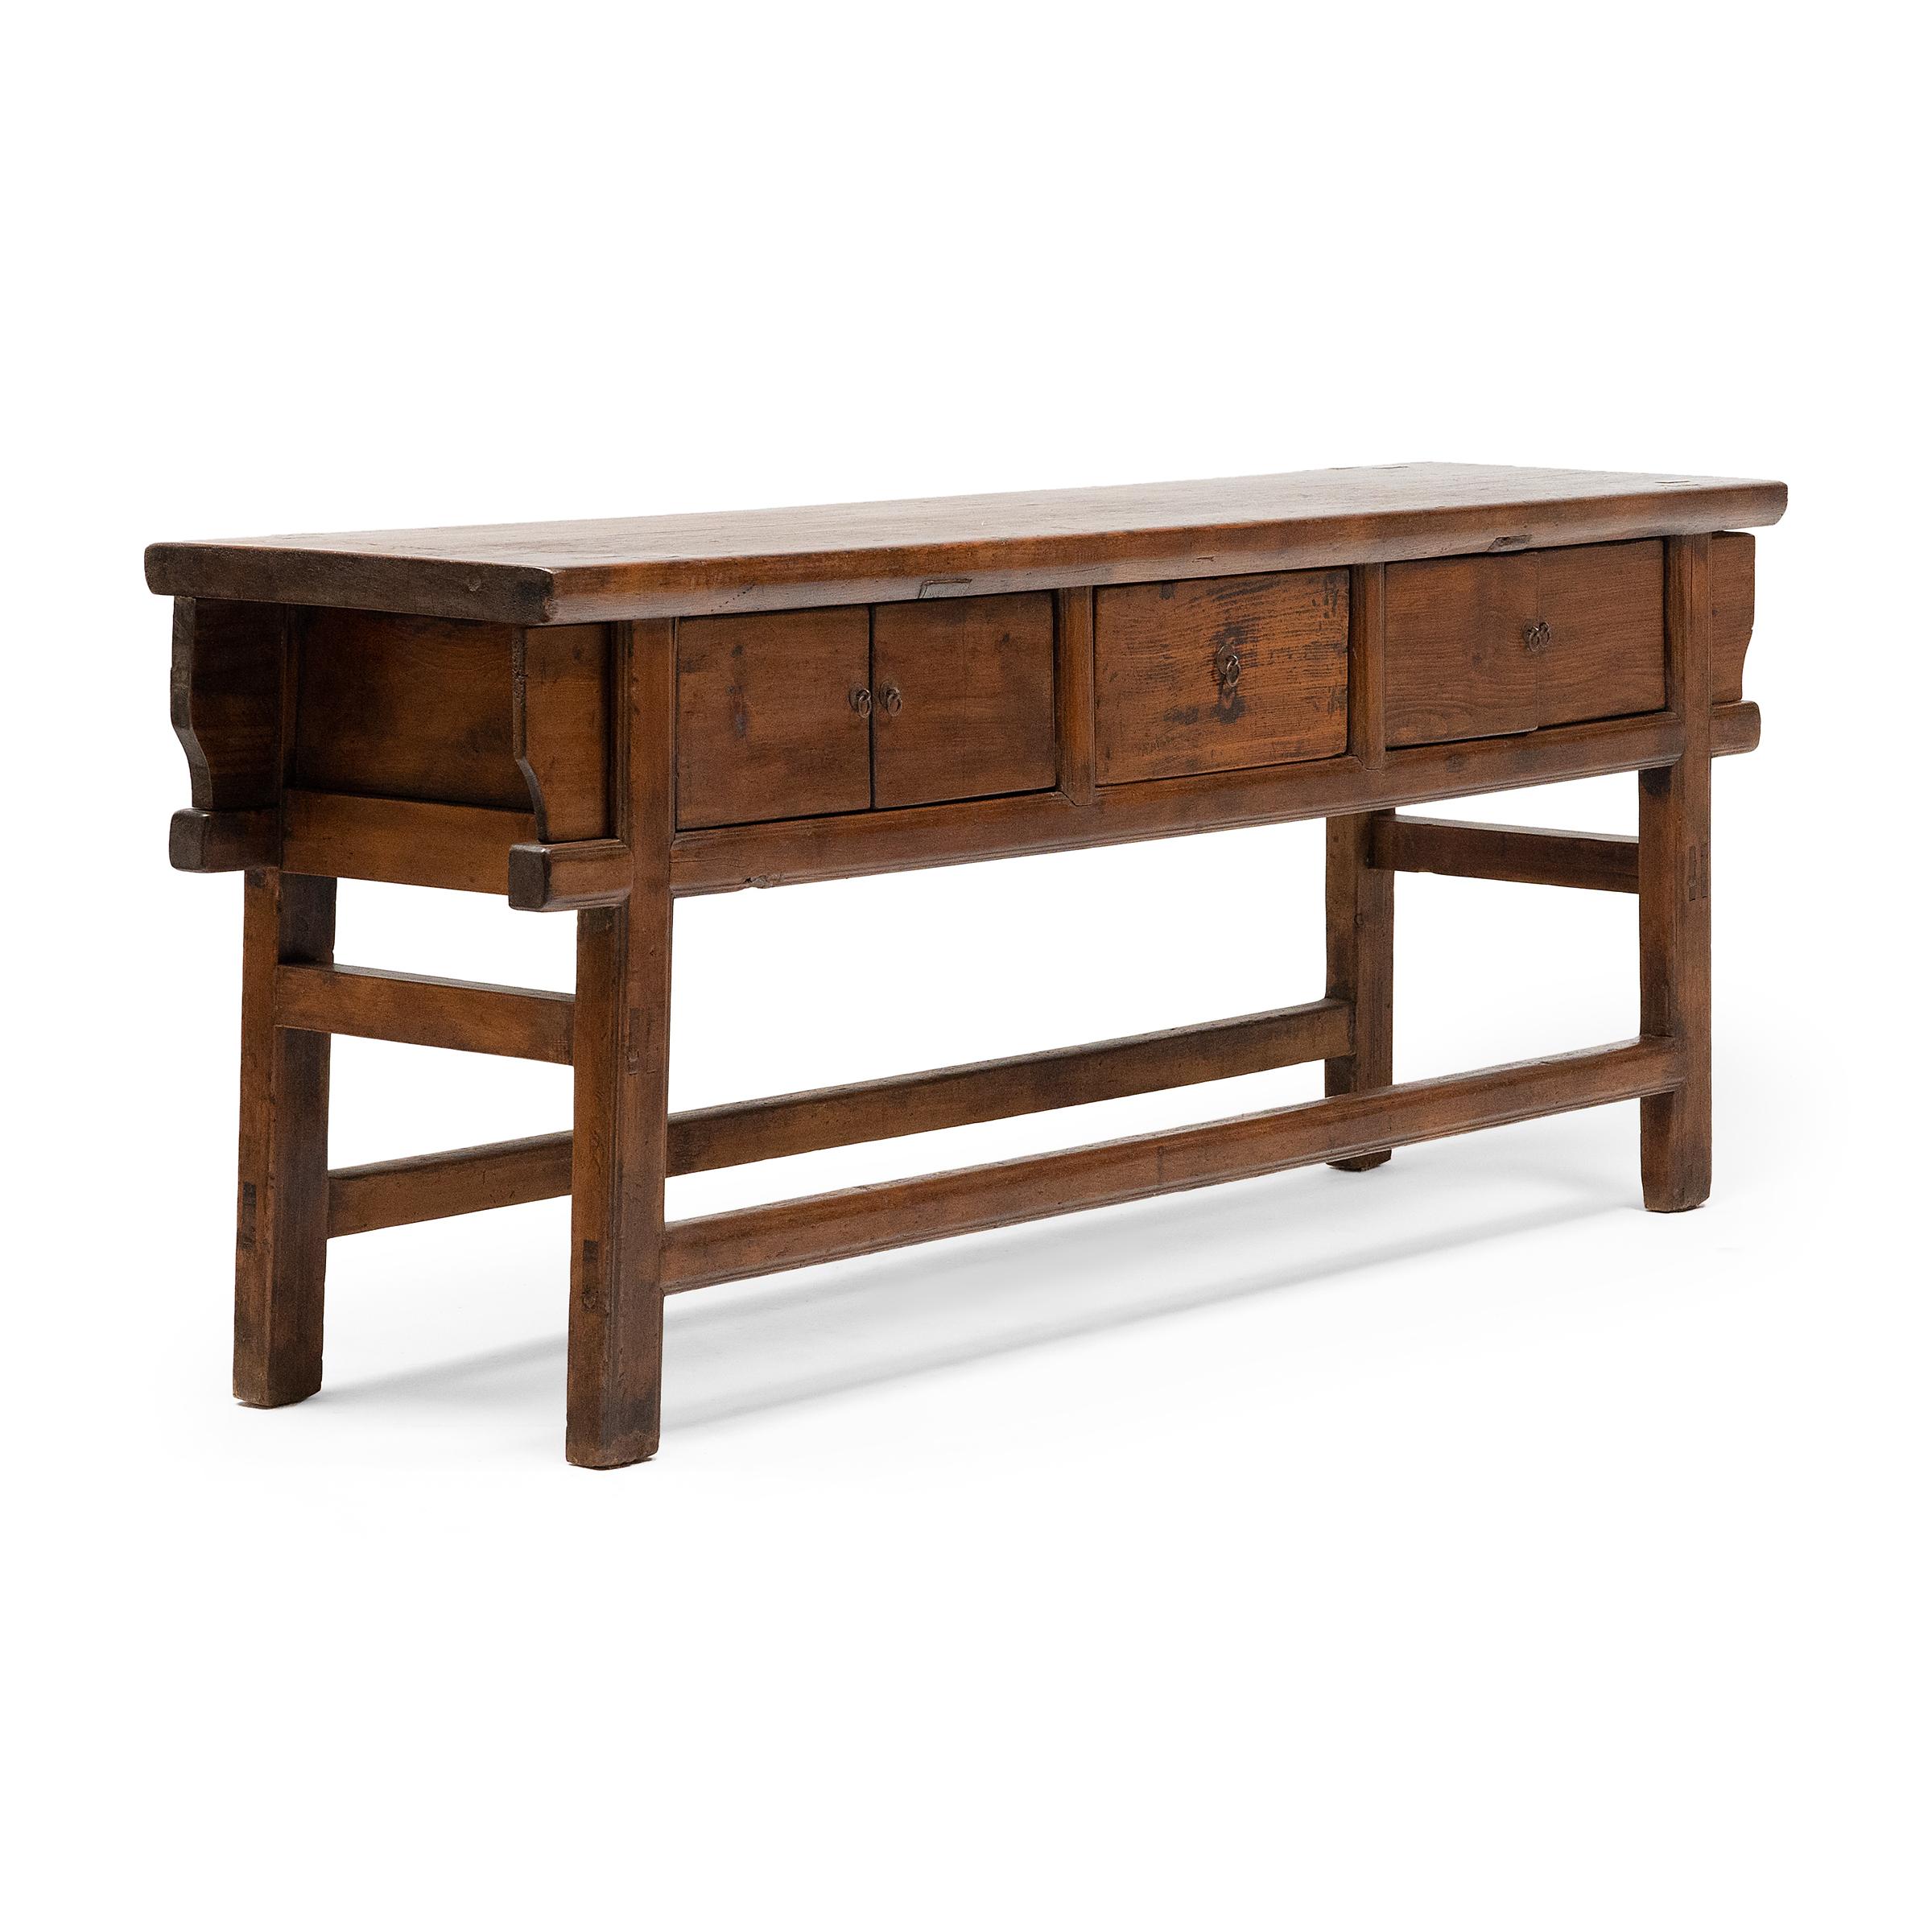 The warm tones and active grain of natural pine wood are the focus of this unusually articulated rustic coffer. Made for a provincial home in northeastern China, this sideboard was once used as a home altar to honor loved ones past and present with